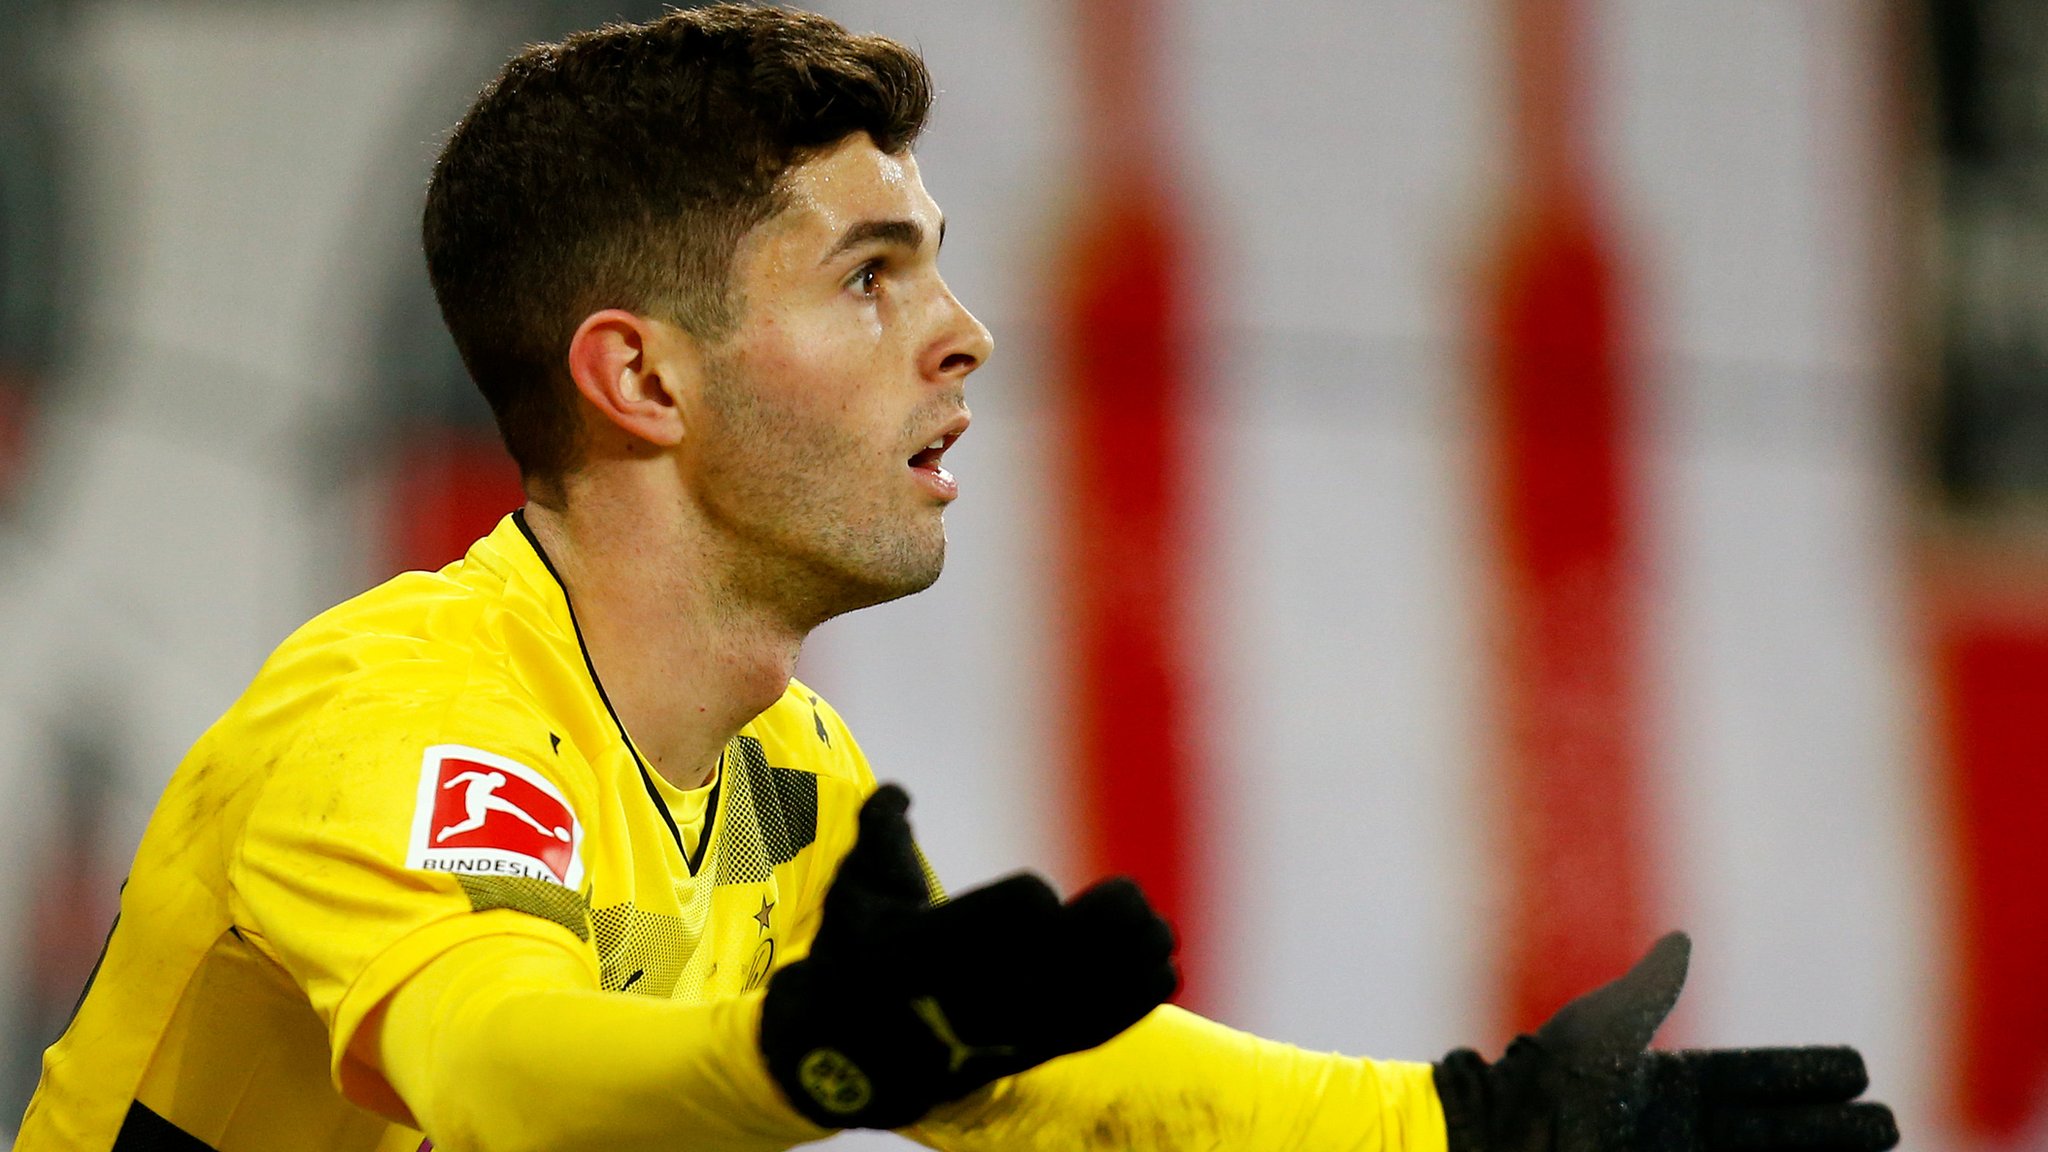 Chelsea face competition for Pulisic - Wednesday's gossip